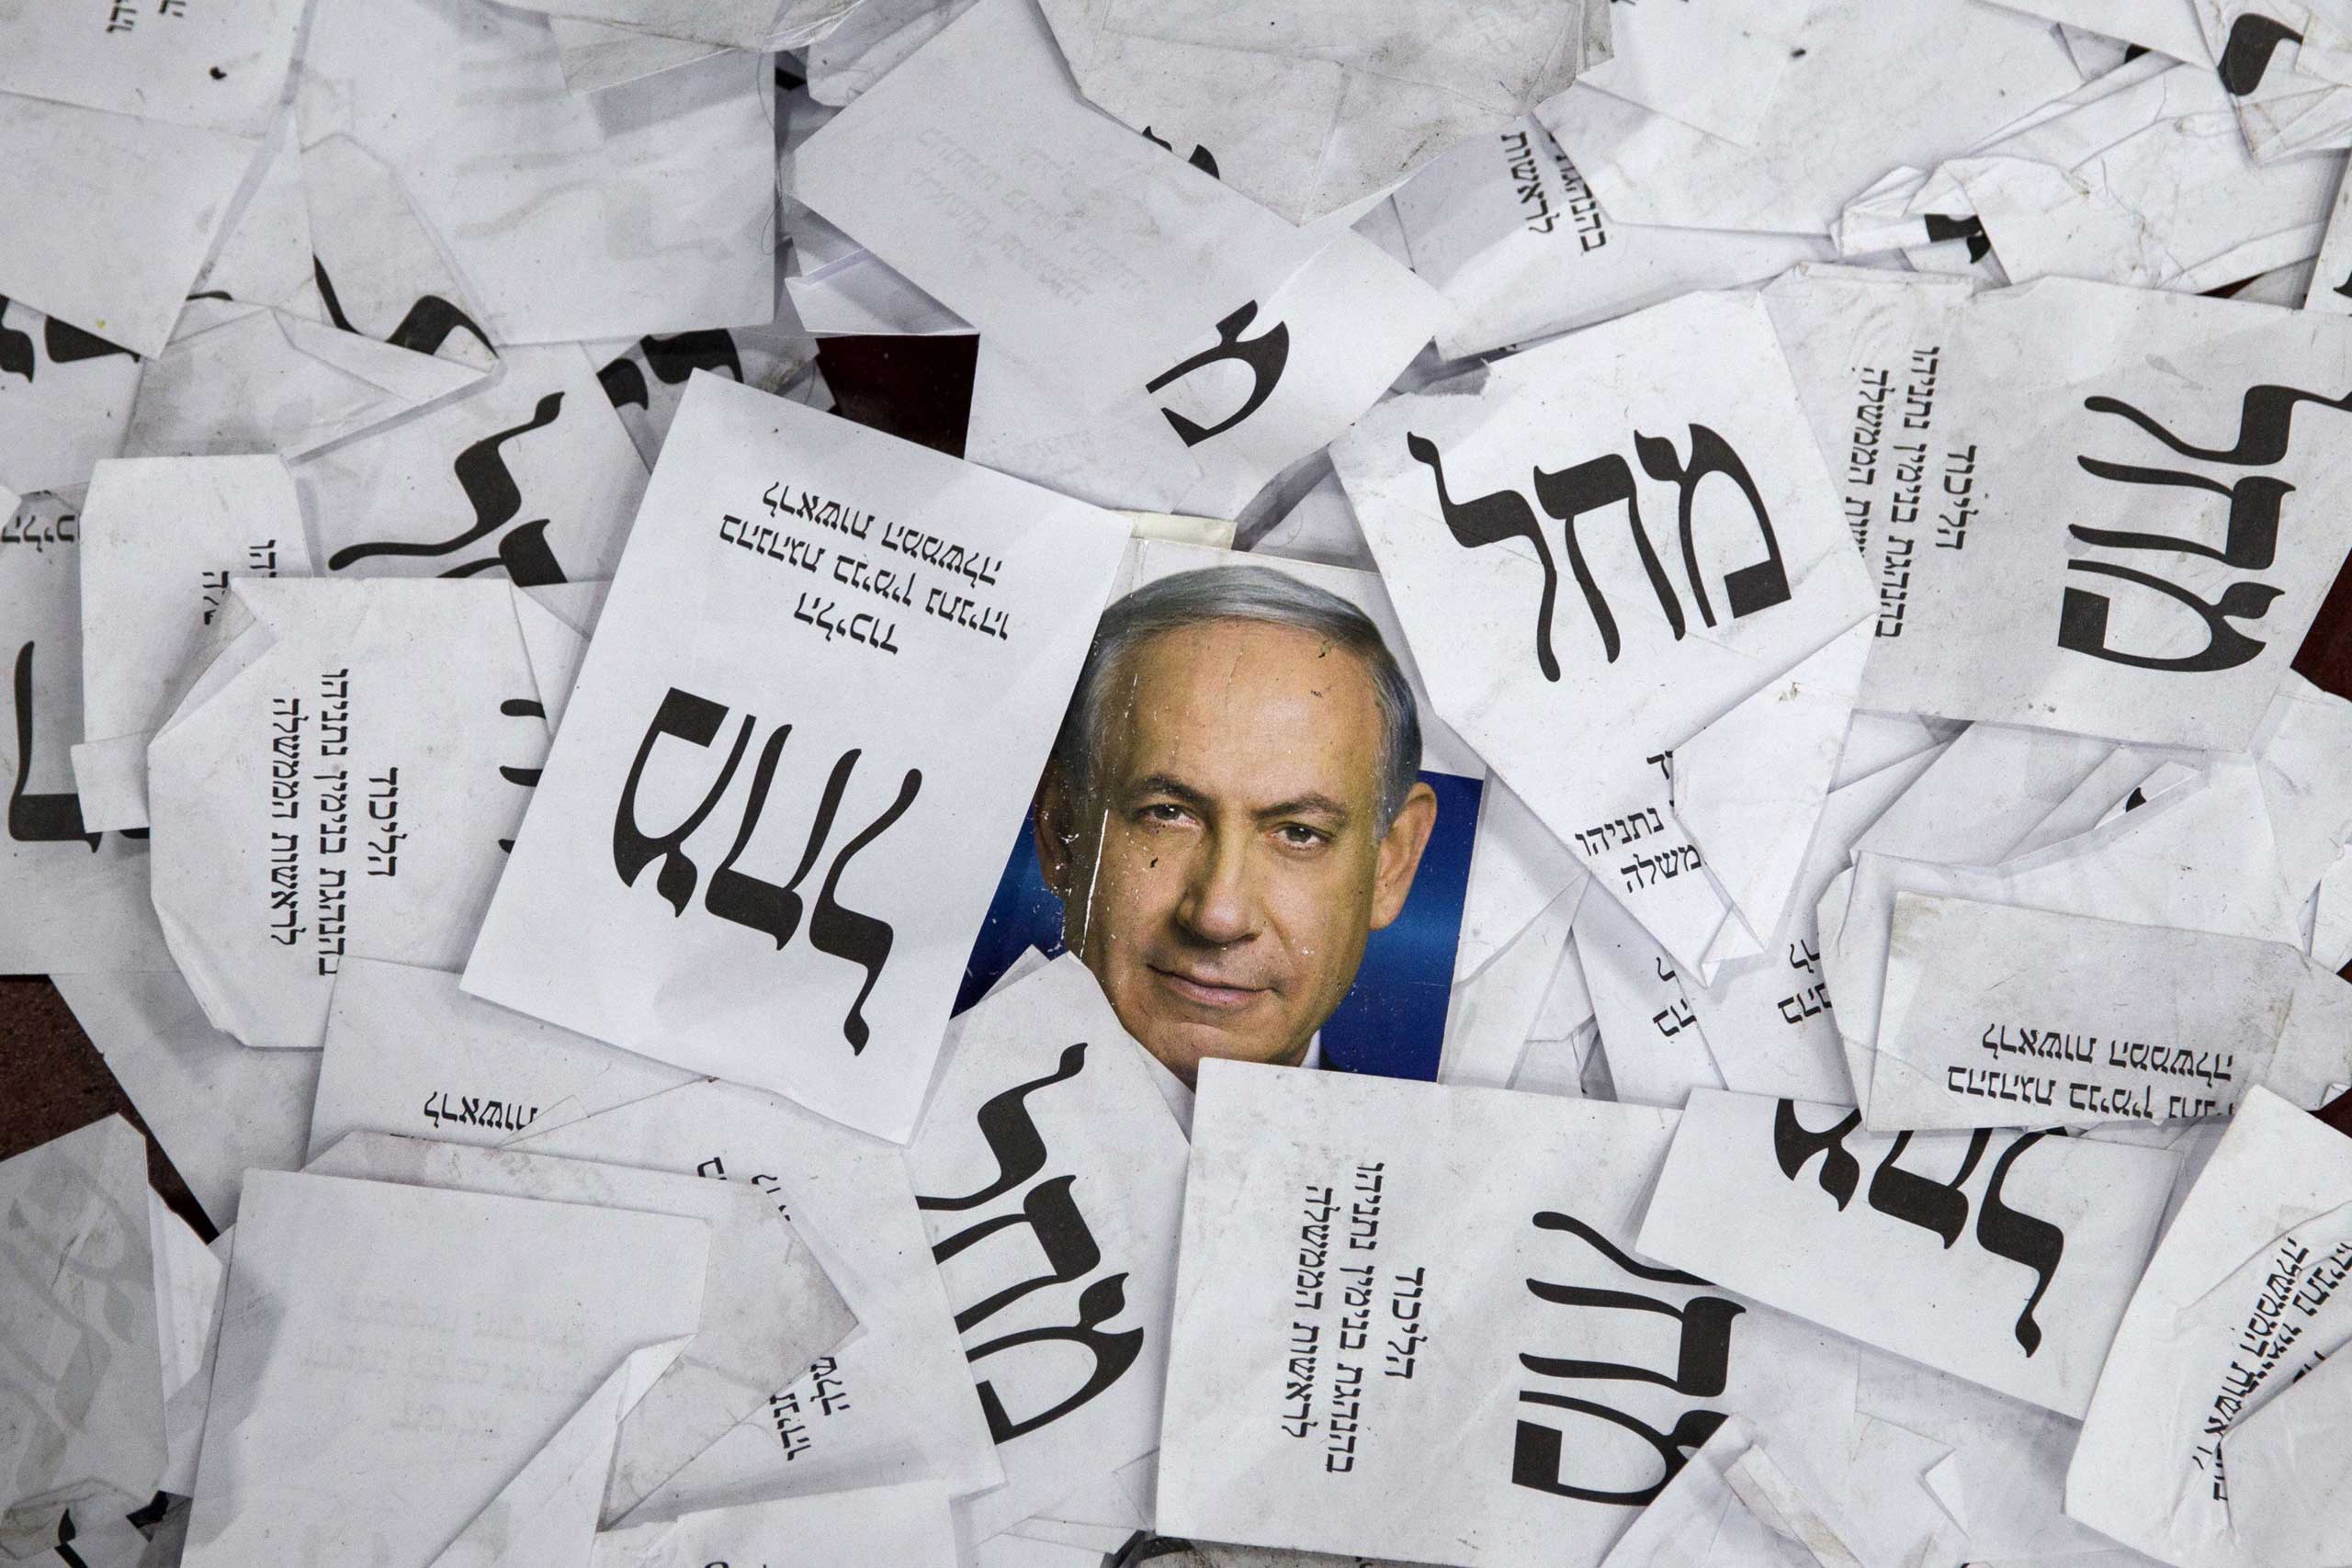 Copies of ballots papers and campaign posters for Israel's Prime Minister Benjamin Netanyahu's Likud Party lie on the ground in the aftermath of the country's parliamentary elections in Tel Aviv on March 18, 2015.